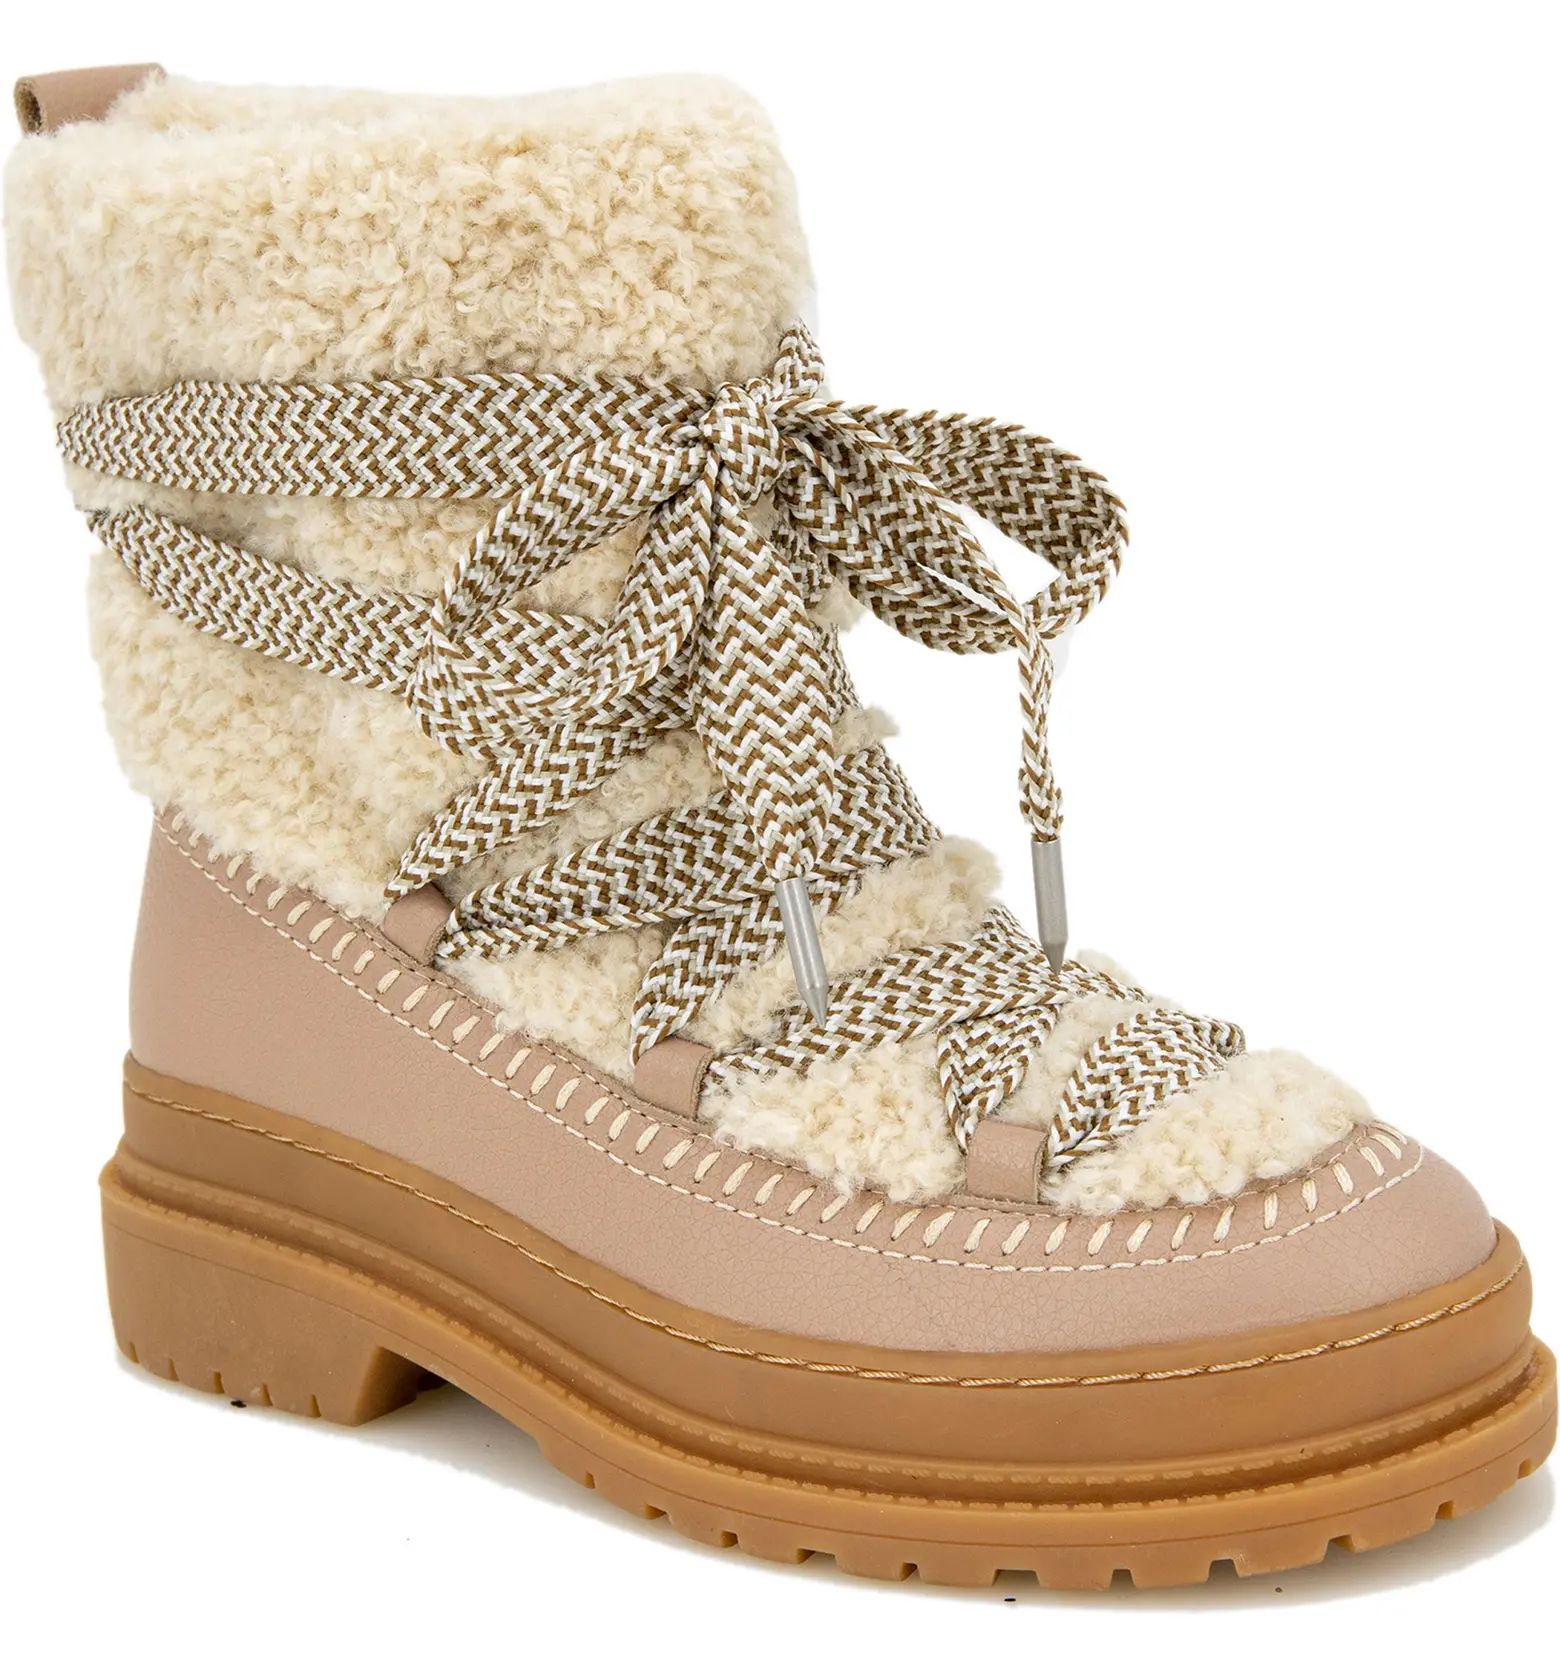 Yuki Leather & Faux Shearling Boot | Nordstrom Rack